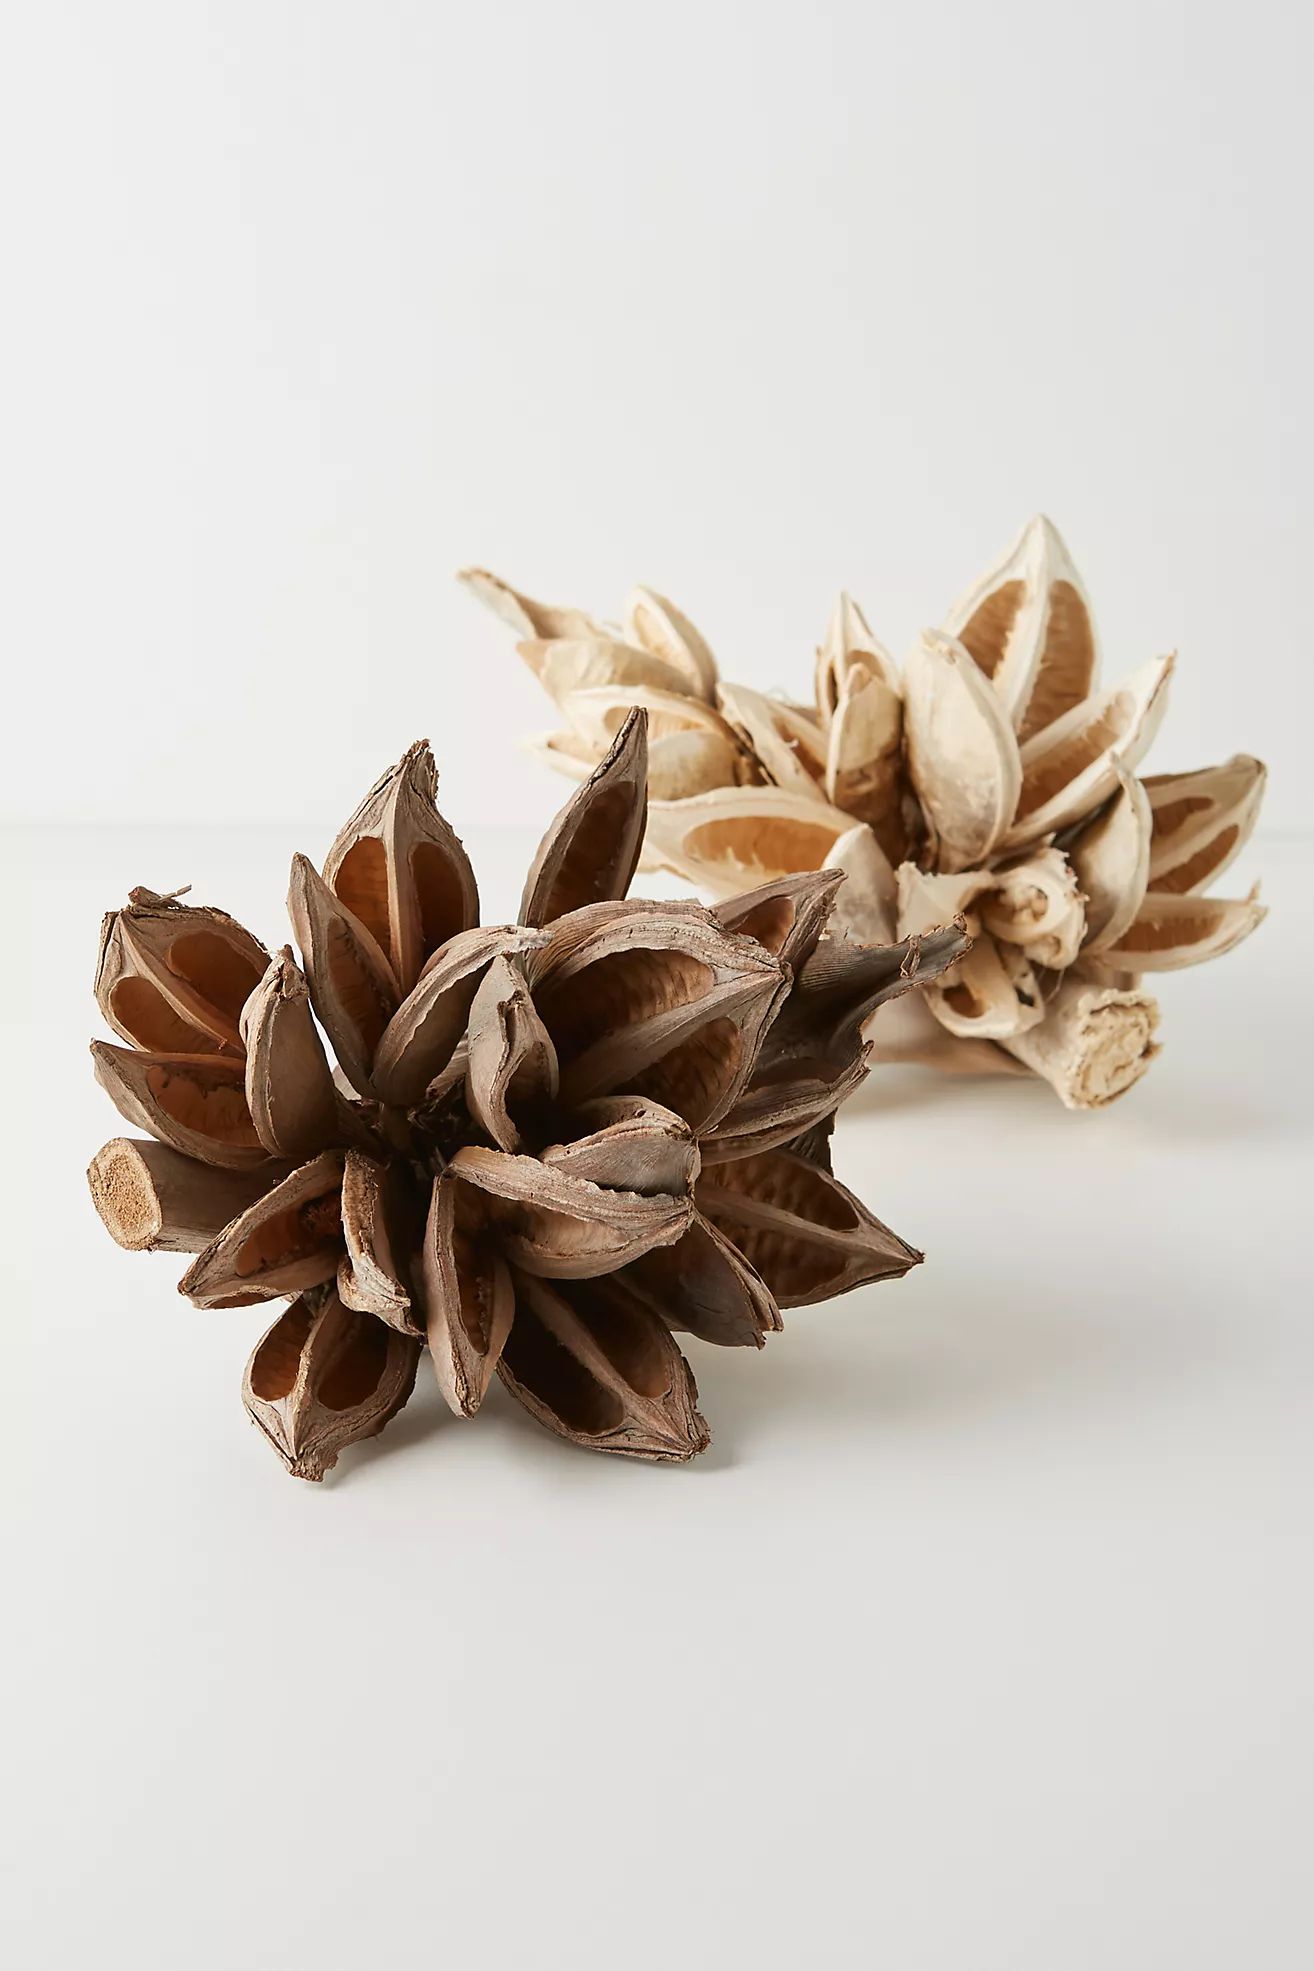 Dried Star Anise Pod | Anthropologie (US)